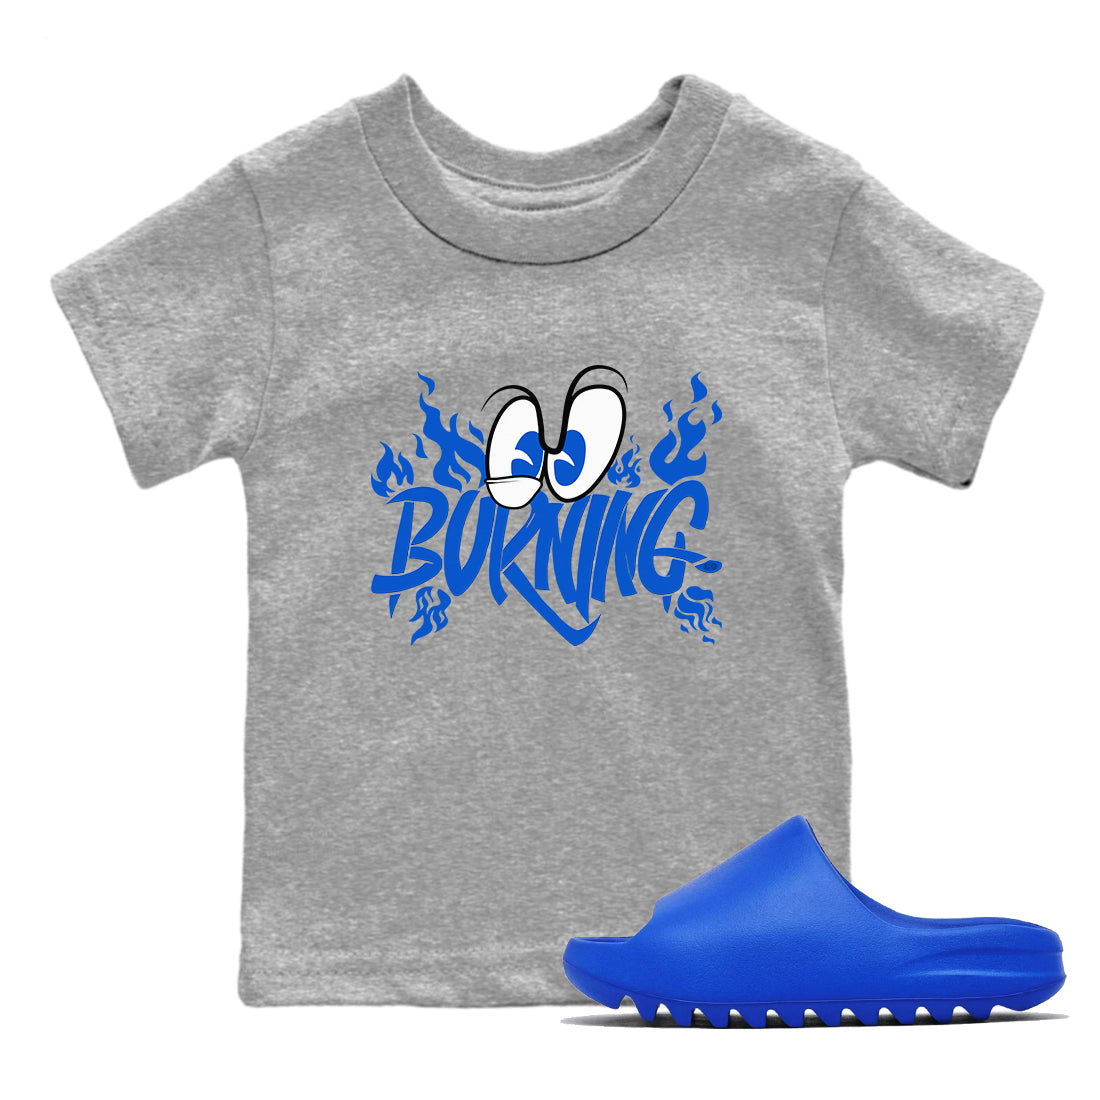 Yeezy Slide Azure shirts to match jordans Burning sneaker match tees Yeezy Slide Azure SNRT Sneaker Tees streetwear brand Baby and Youth Heather Grey 1 cotton tee